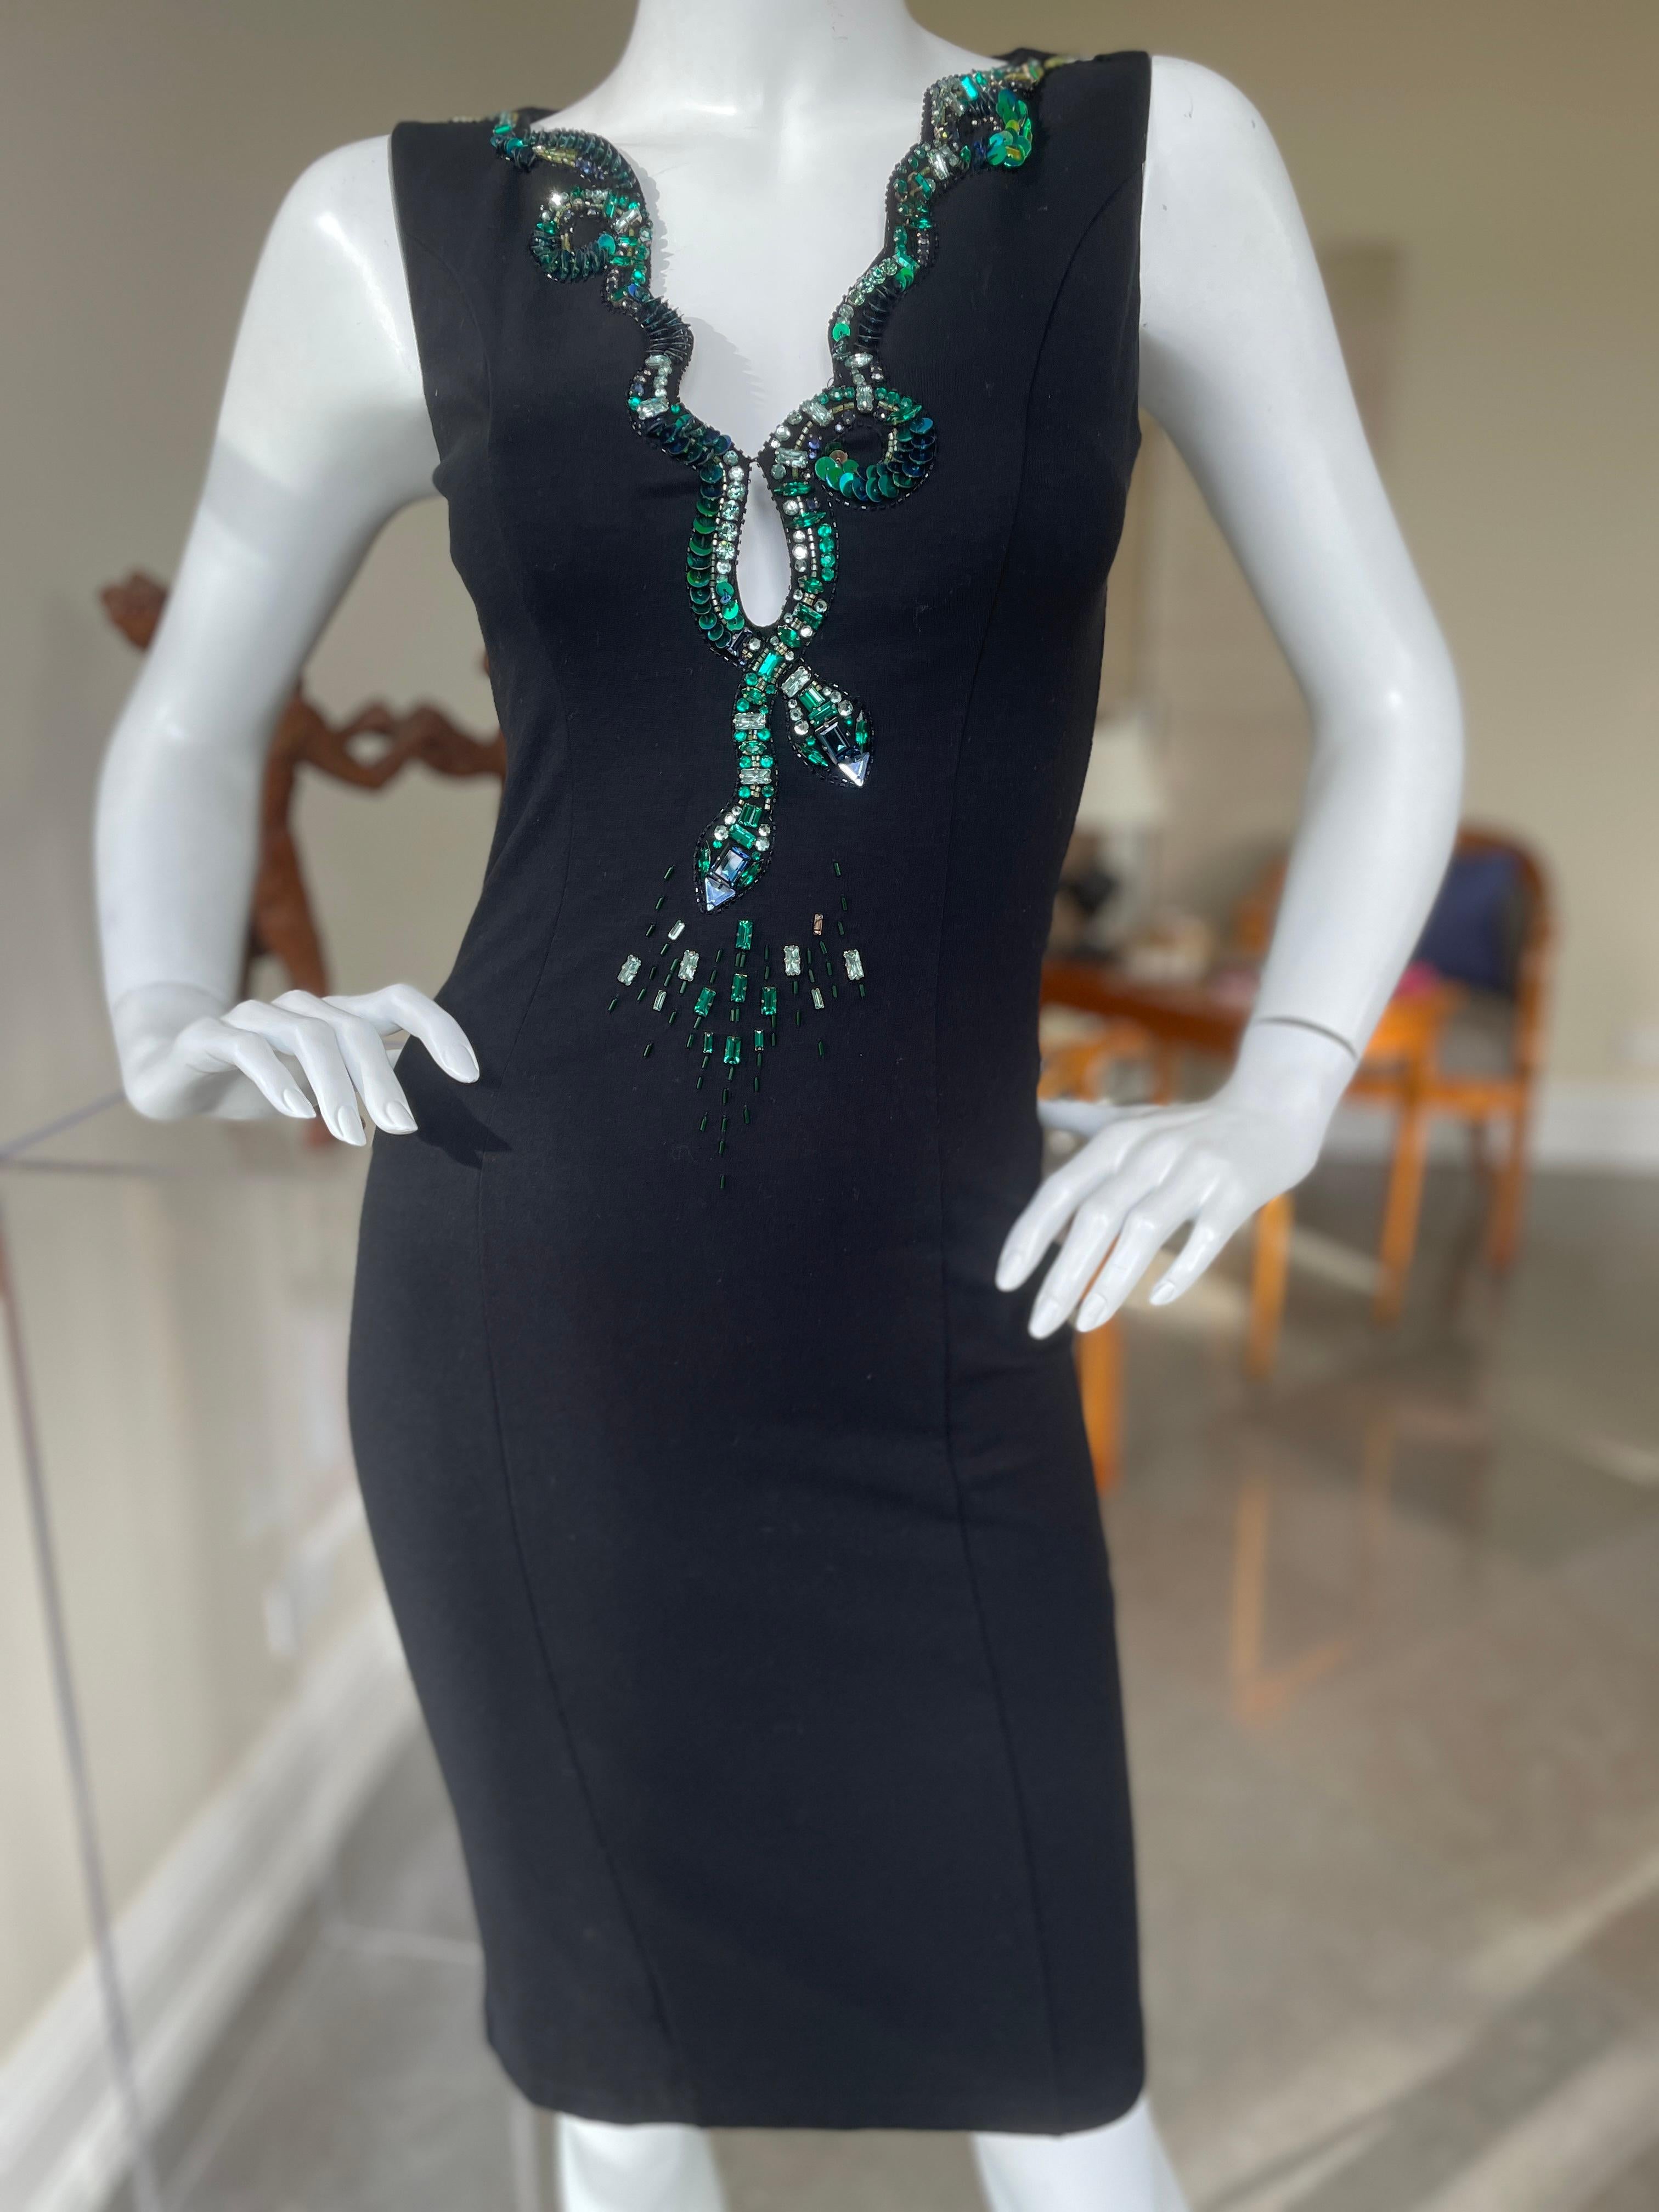 Roberto Cavalli Vintage Black Bodycon Dress with Embellished Snake Collar.
Who created the first snake embellished fashion? Ask Eve.
This is amazing, very stretchy dress, hugs all the right places.
Size 40
 Bust 34